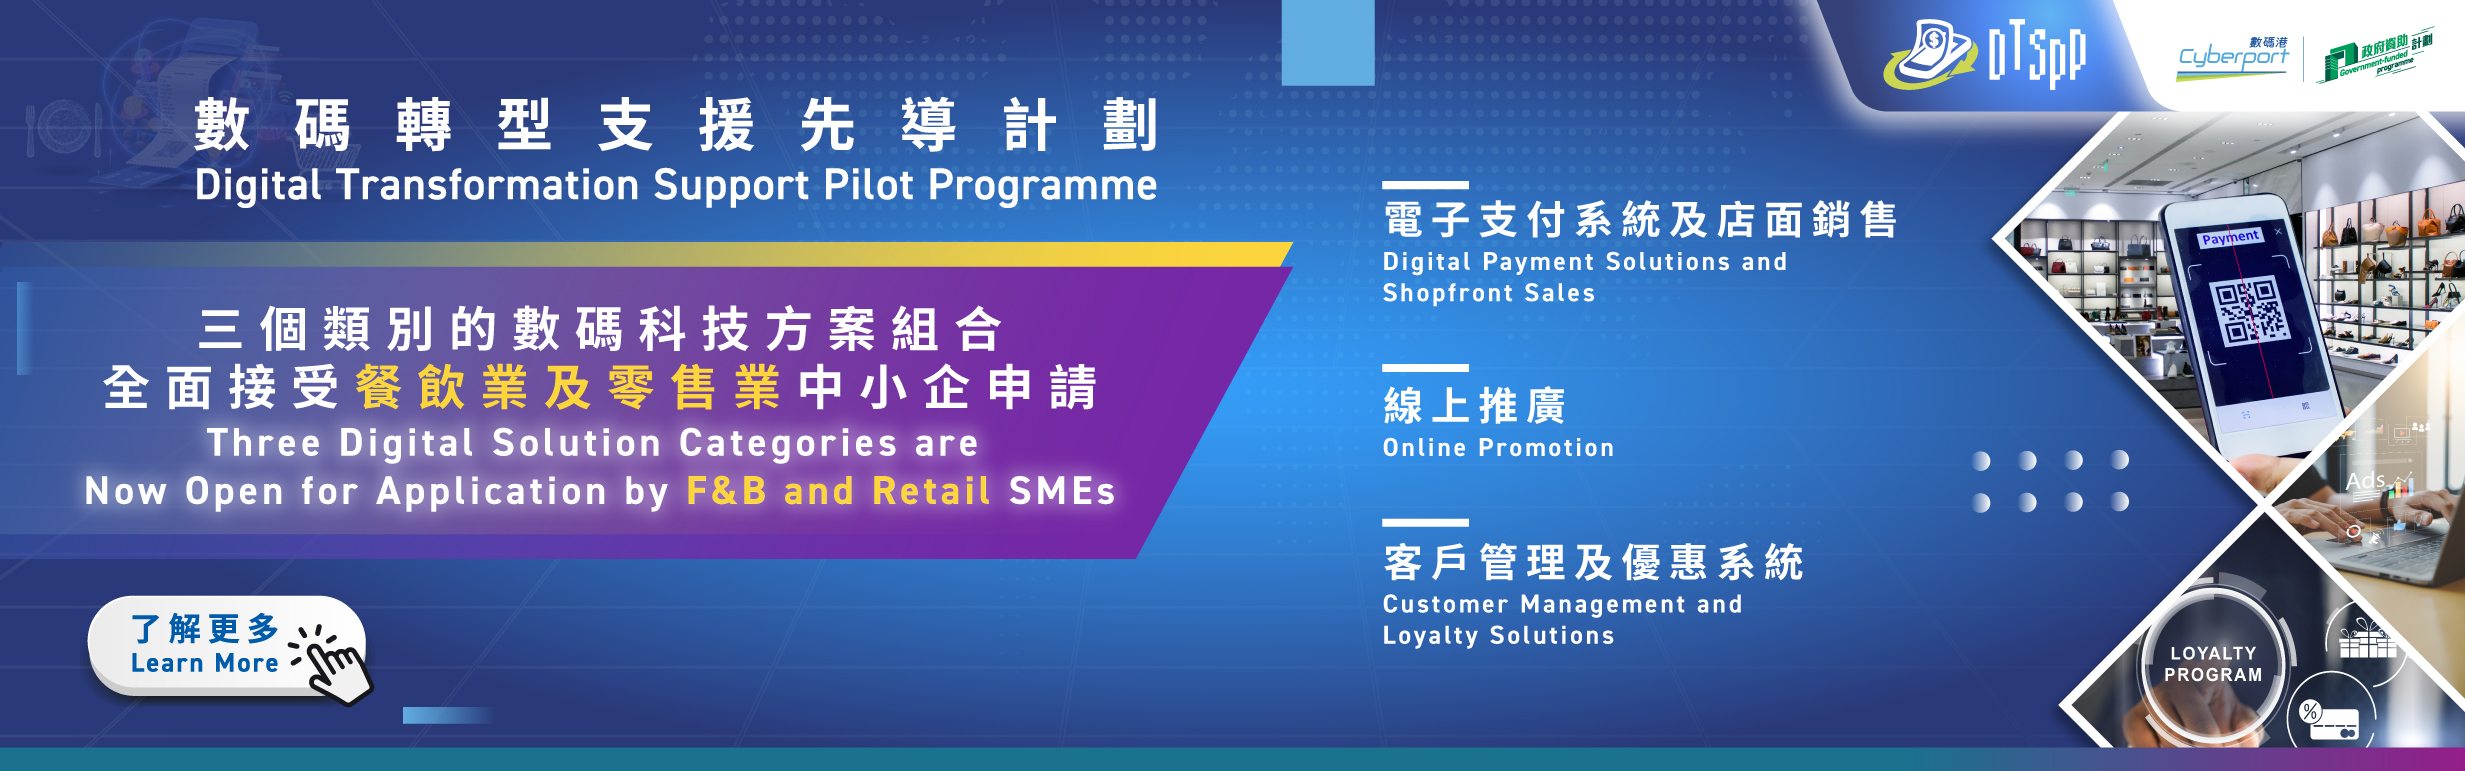 DTSPP｜Three Digital Solution Categories are NOW Open for Application by F&B and Retail SMEs